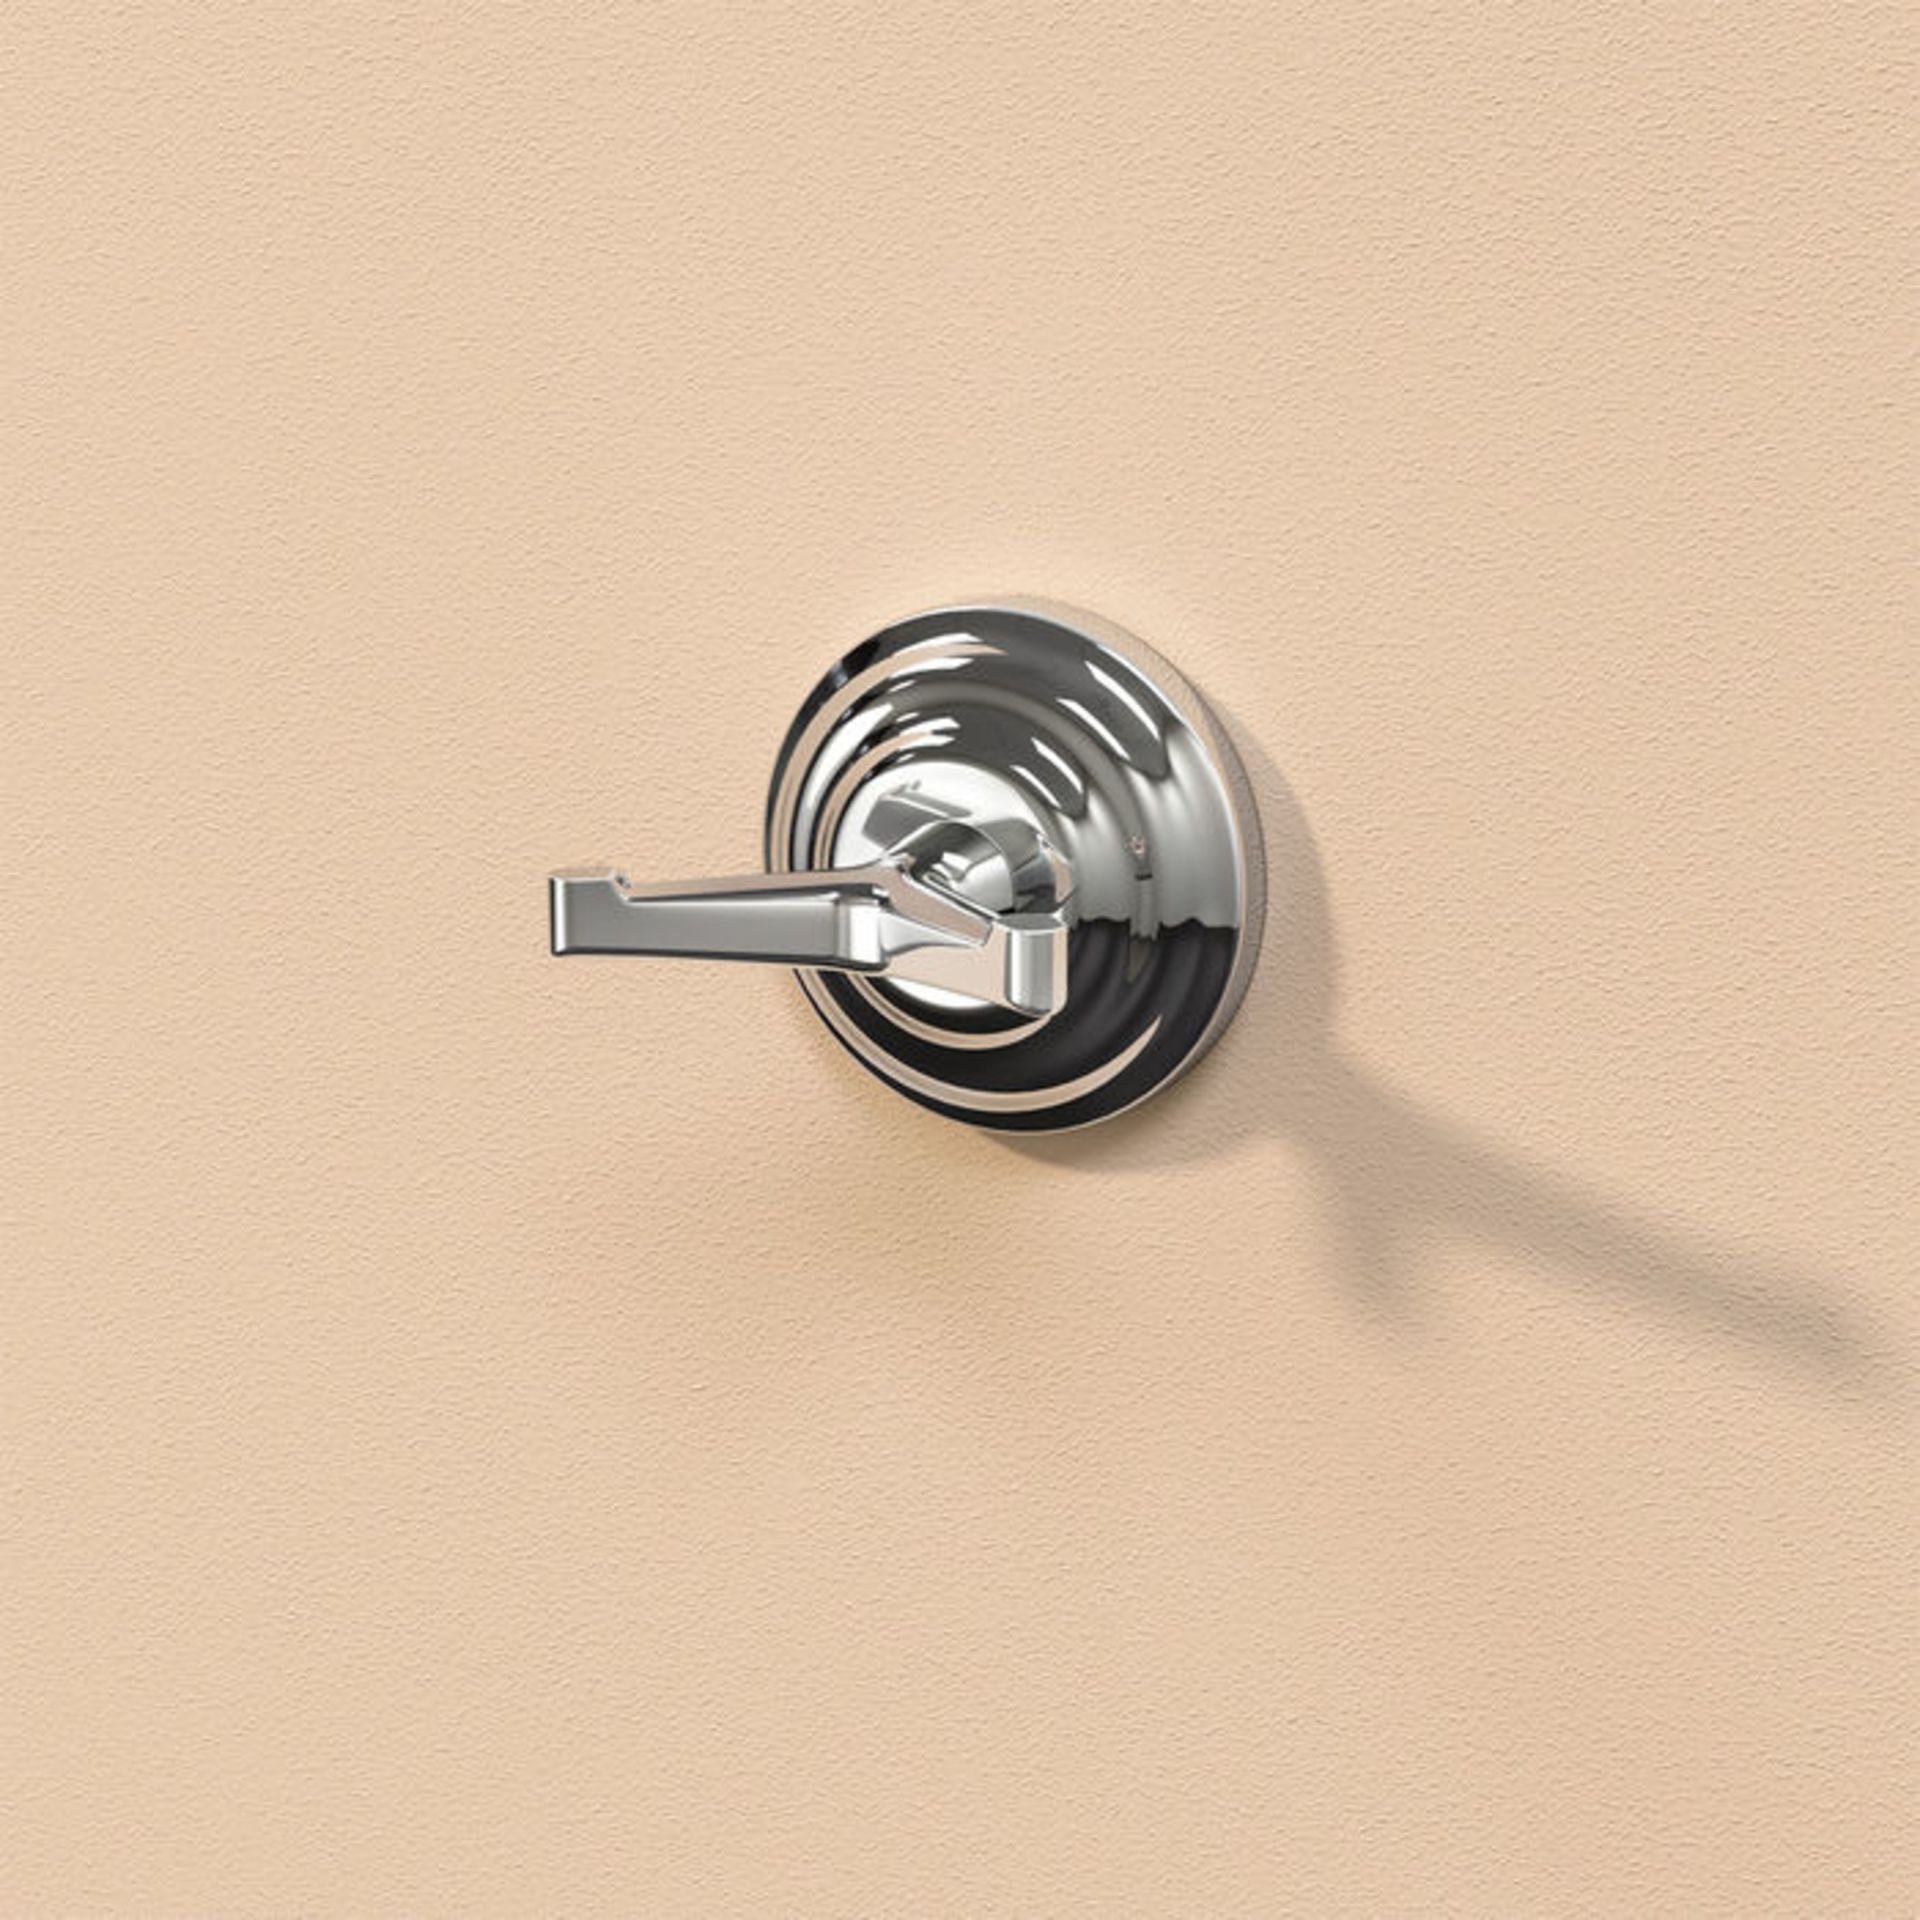 (D1004) York Robe Hook Finishes your bathroom with a little extra functionality and style Mad... - Image 2 of 3